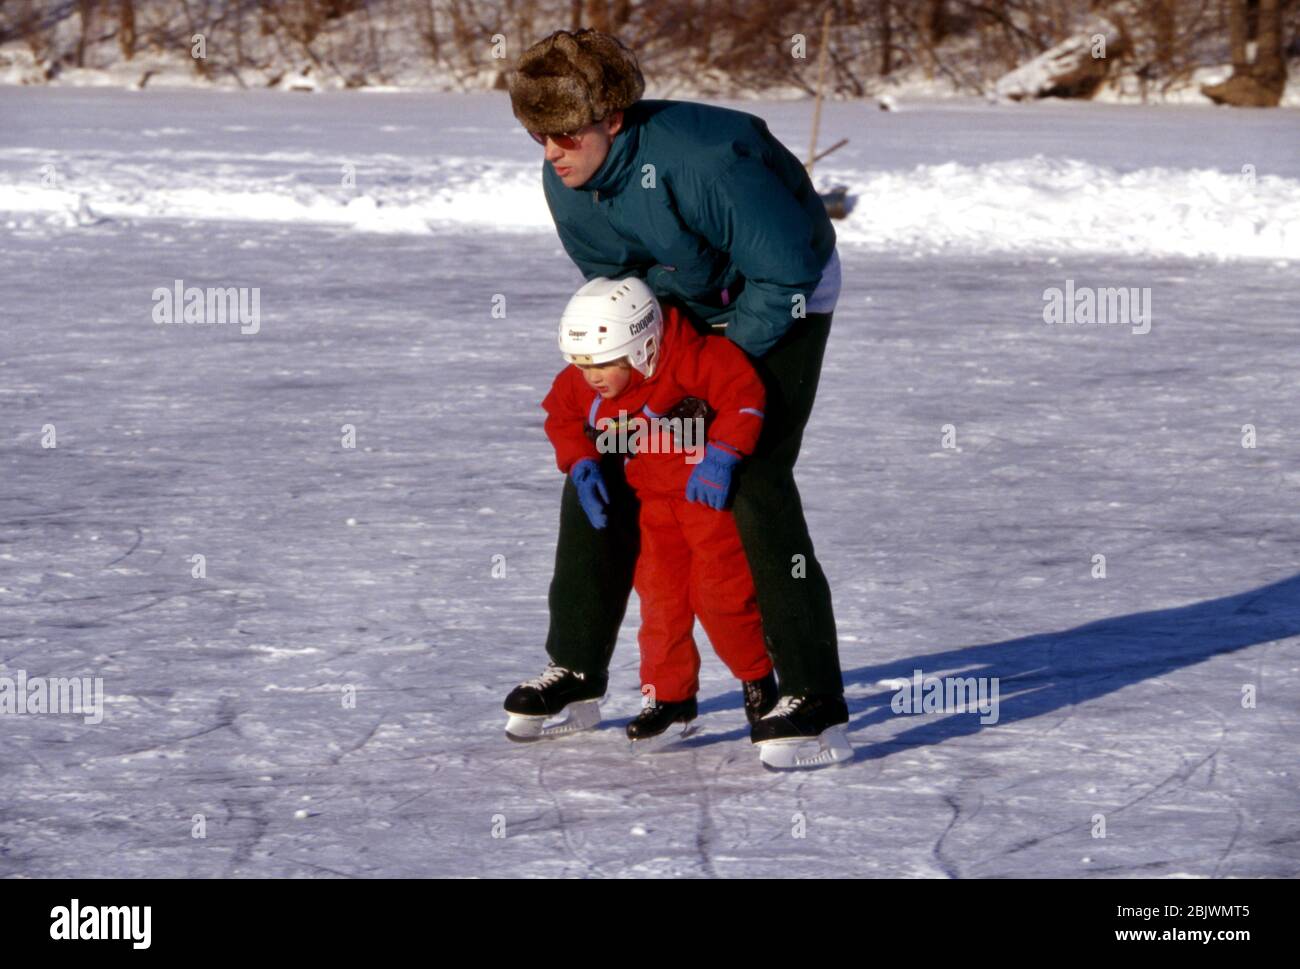 A father helps his young son skate on an outdoor frozen pond Stock Photo